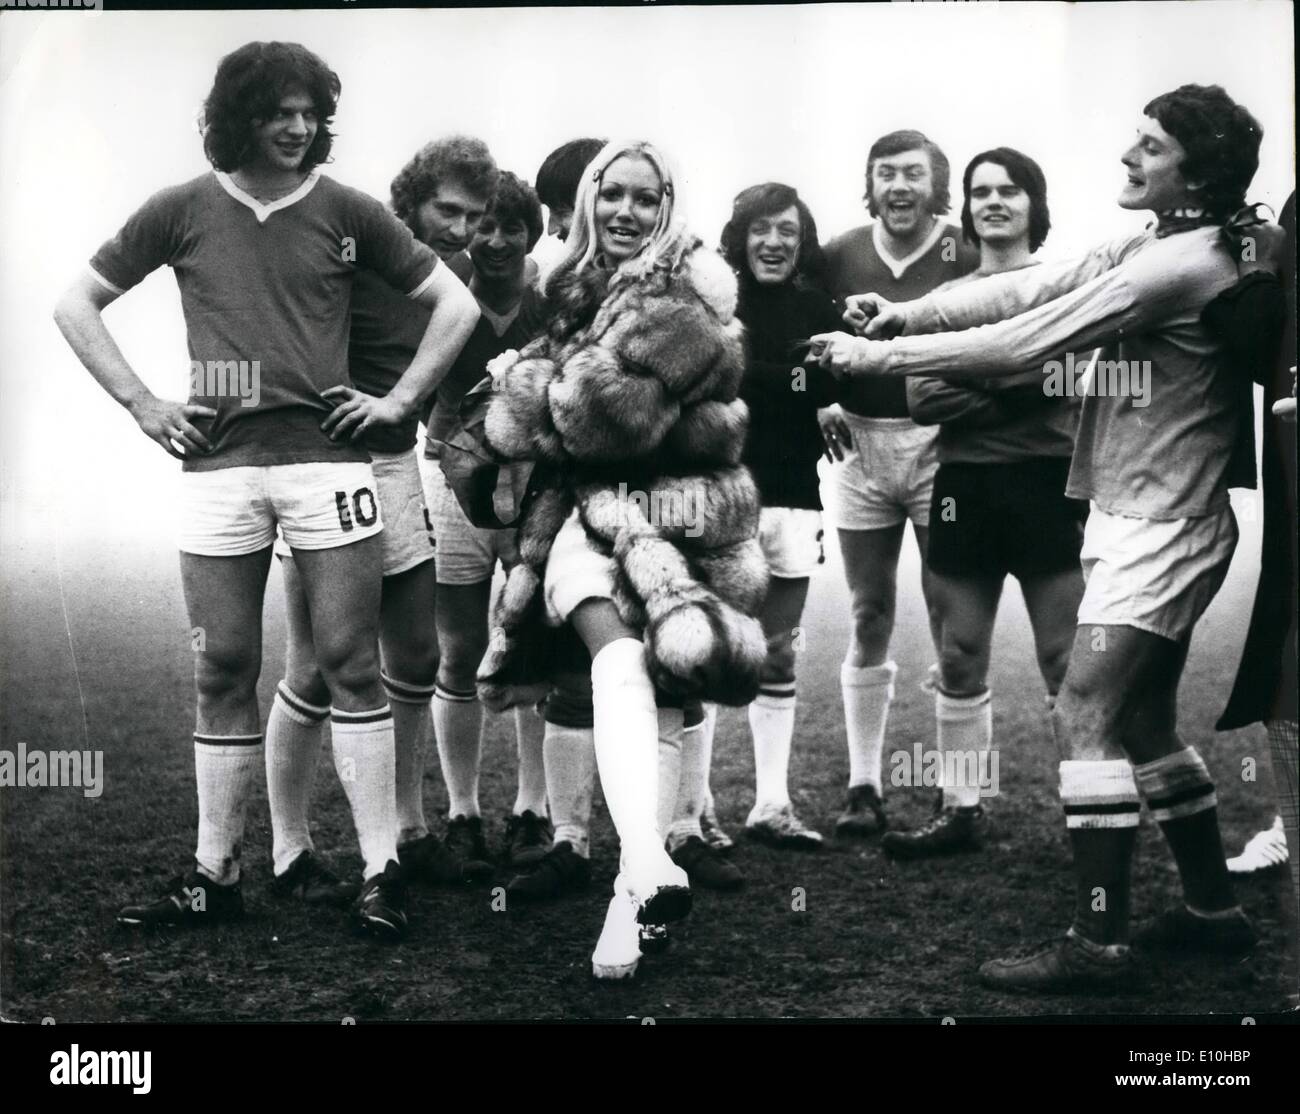 Feb. 02, 1973 - Adrienne Posta kicks off BBC Panto Soccer game: Adrienne Posta, lovely blonde star of Babas in the wood' the Palladium Pantomime, yesterday exchanged her role of Maid Marion to become footballer when she kicked off the match between the Pantomime staff and BBC tv' s General Features team. Photo shows Adrienne Posta, well wrapped up in fur coat, kiks off for the start of the match. Stock Photo